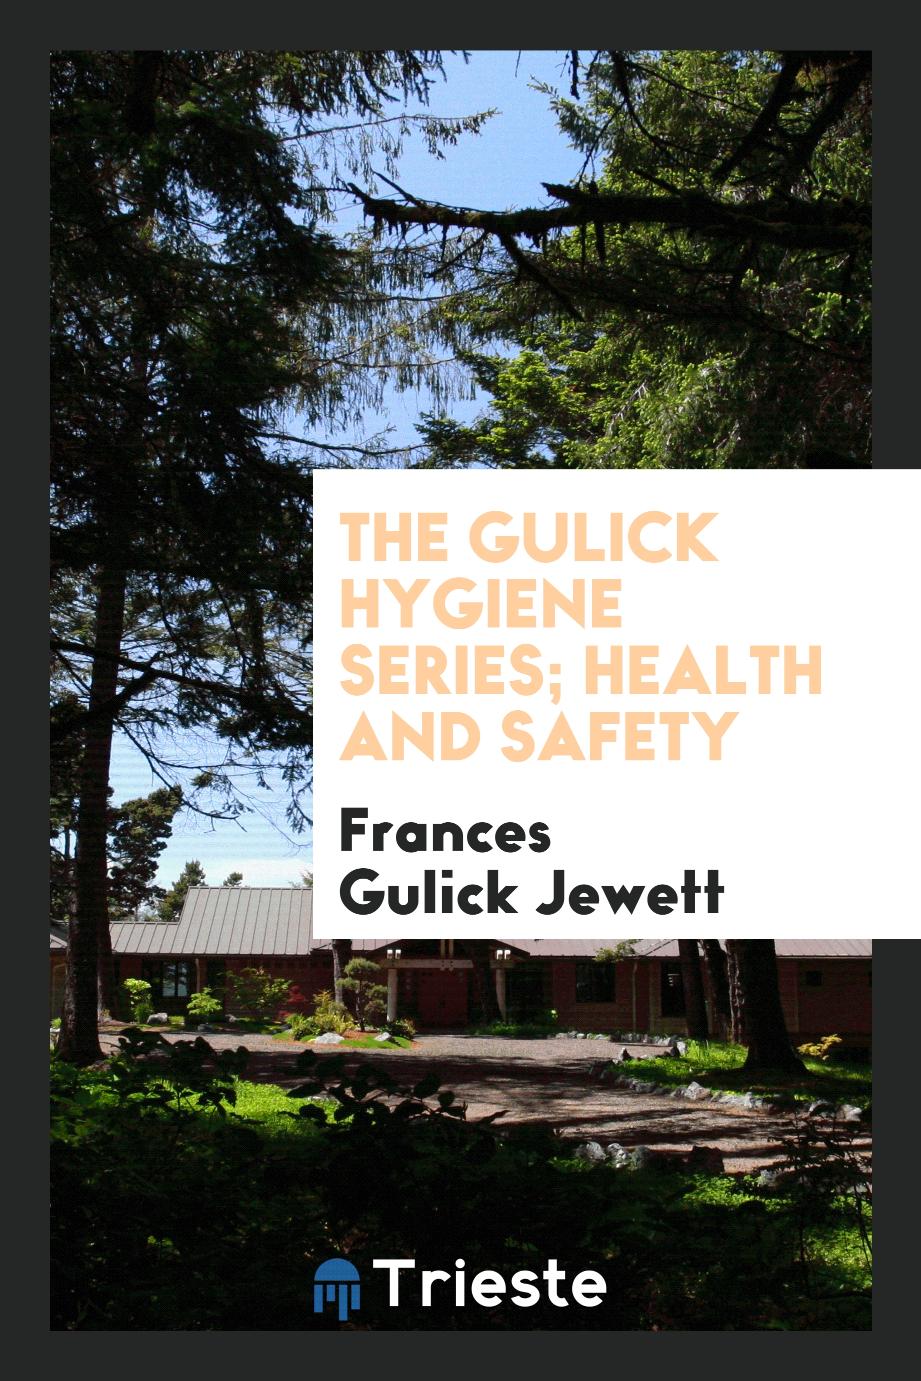 The Gulick Hygiene Series; Health and Safety